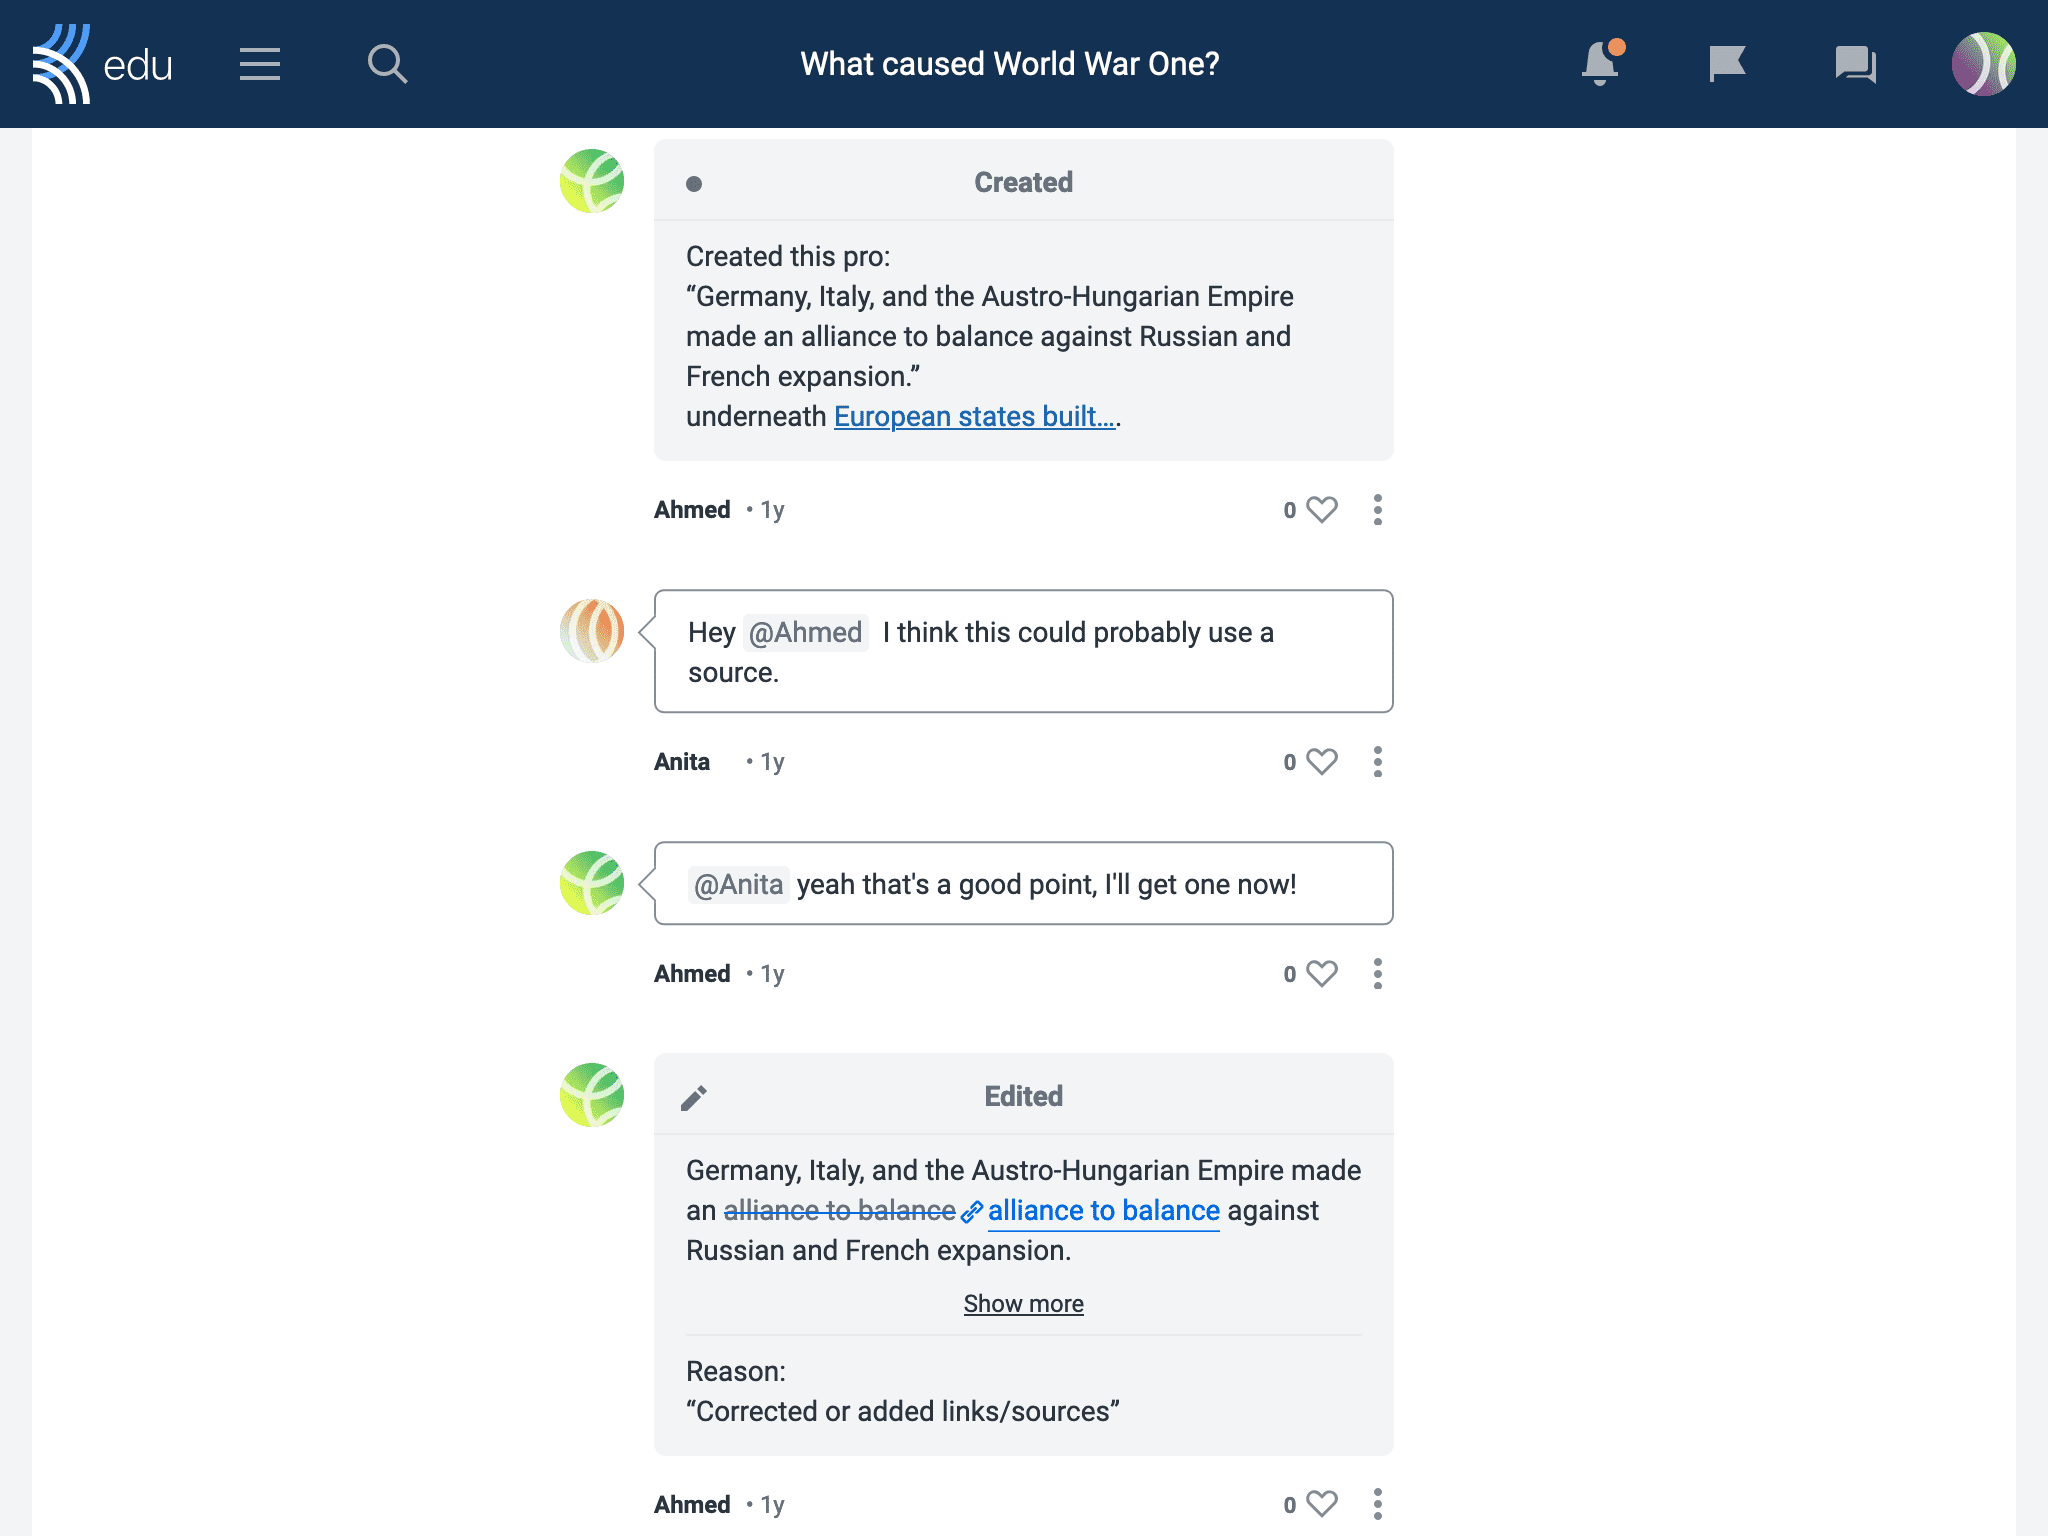 A student comments under a claim to suggest adding a source to the claim. Another student replies that it's a good idea and adds a source to this claim.